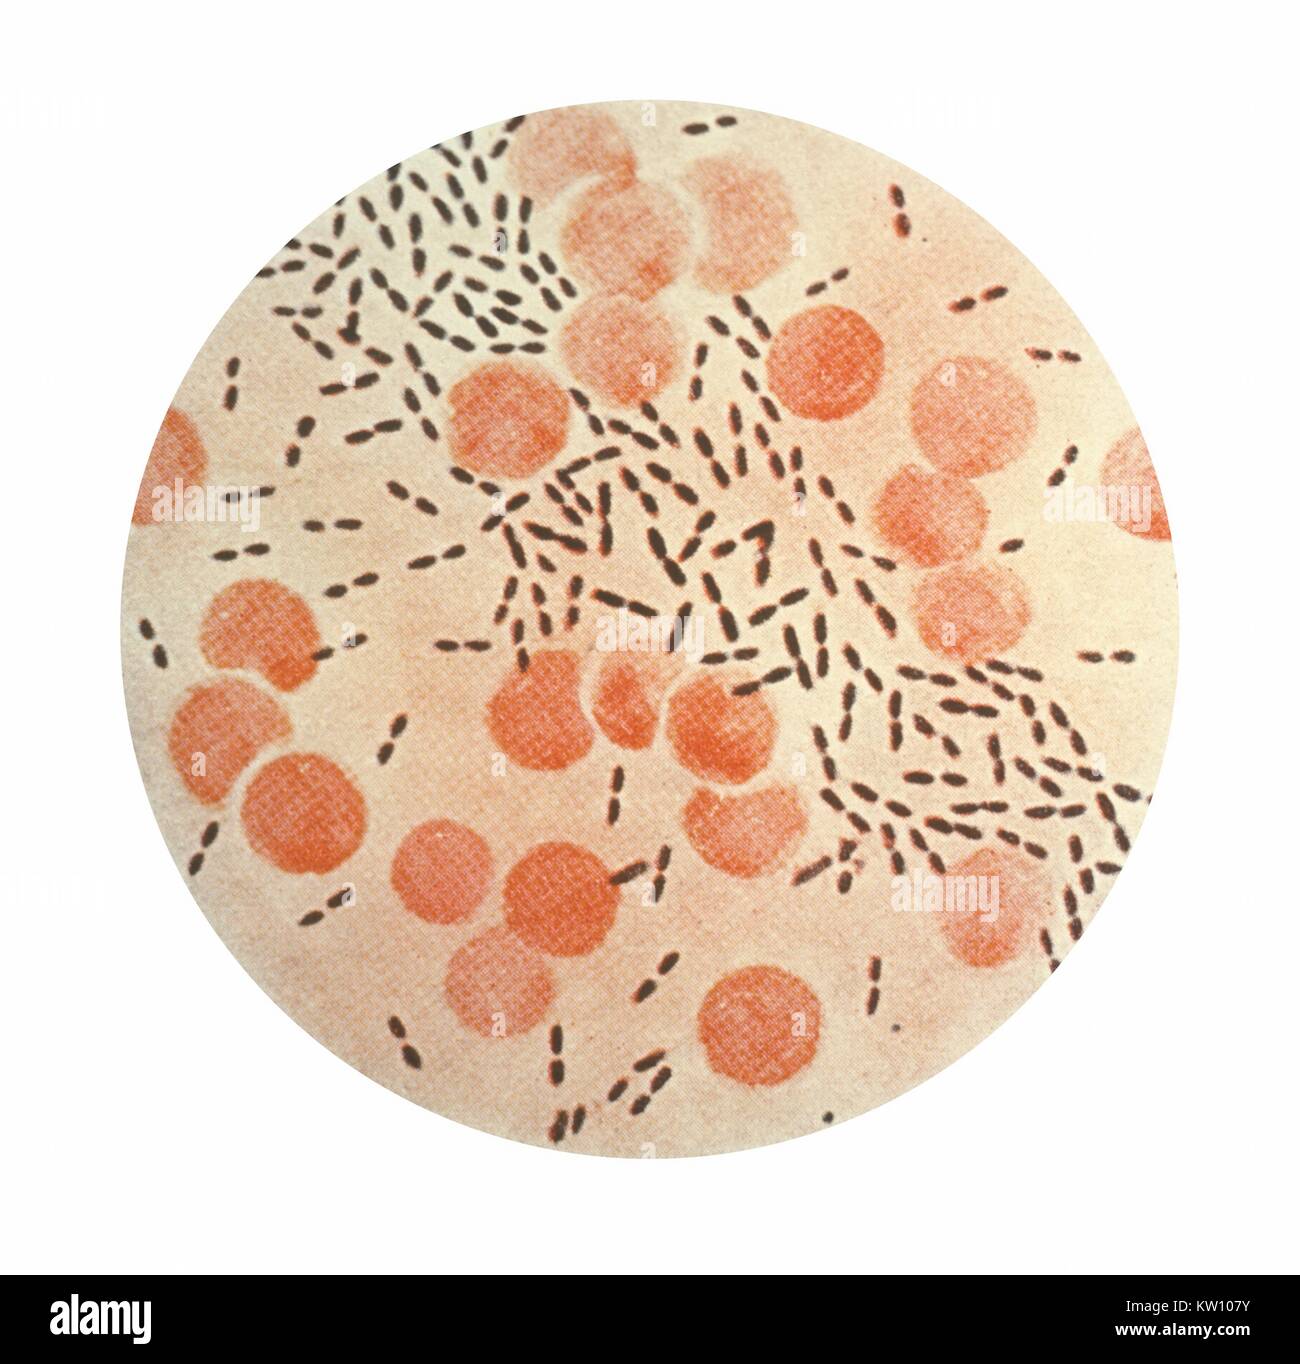 This illustration depicts a photomicrographic view of Streptococcus (Diplococcus) pneumoniae bacteria, using Gram-stain technique. Streptococcus pneumoniae is one of the most common organisms causing respiratory infections such as pneumonia and sinusitis, as well as bacteremia, otitis media, meningitis, peritonitis and arthritis. Streptococci. Image courtesy CDC, 1979. Stock Photo